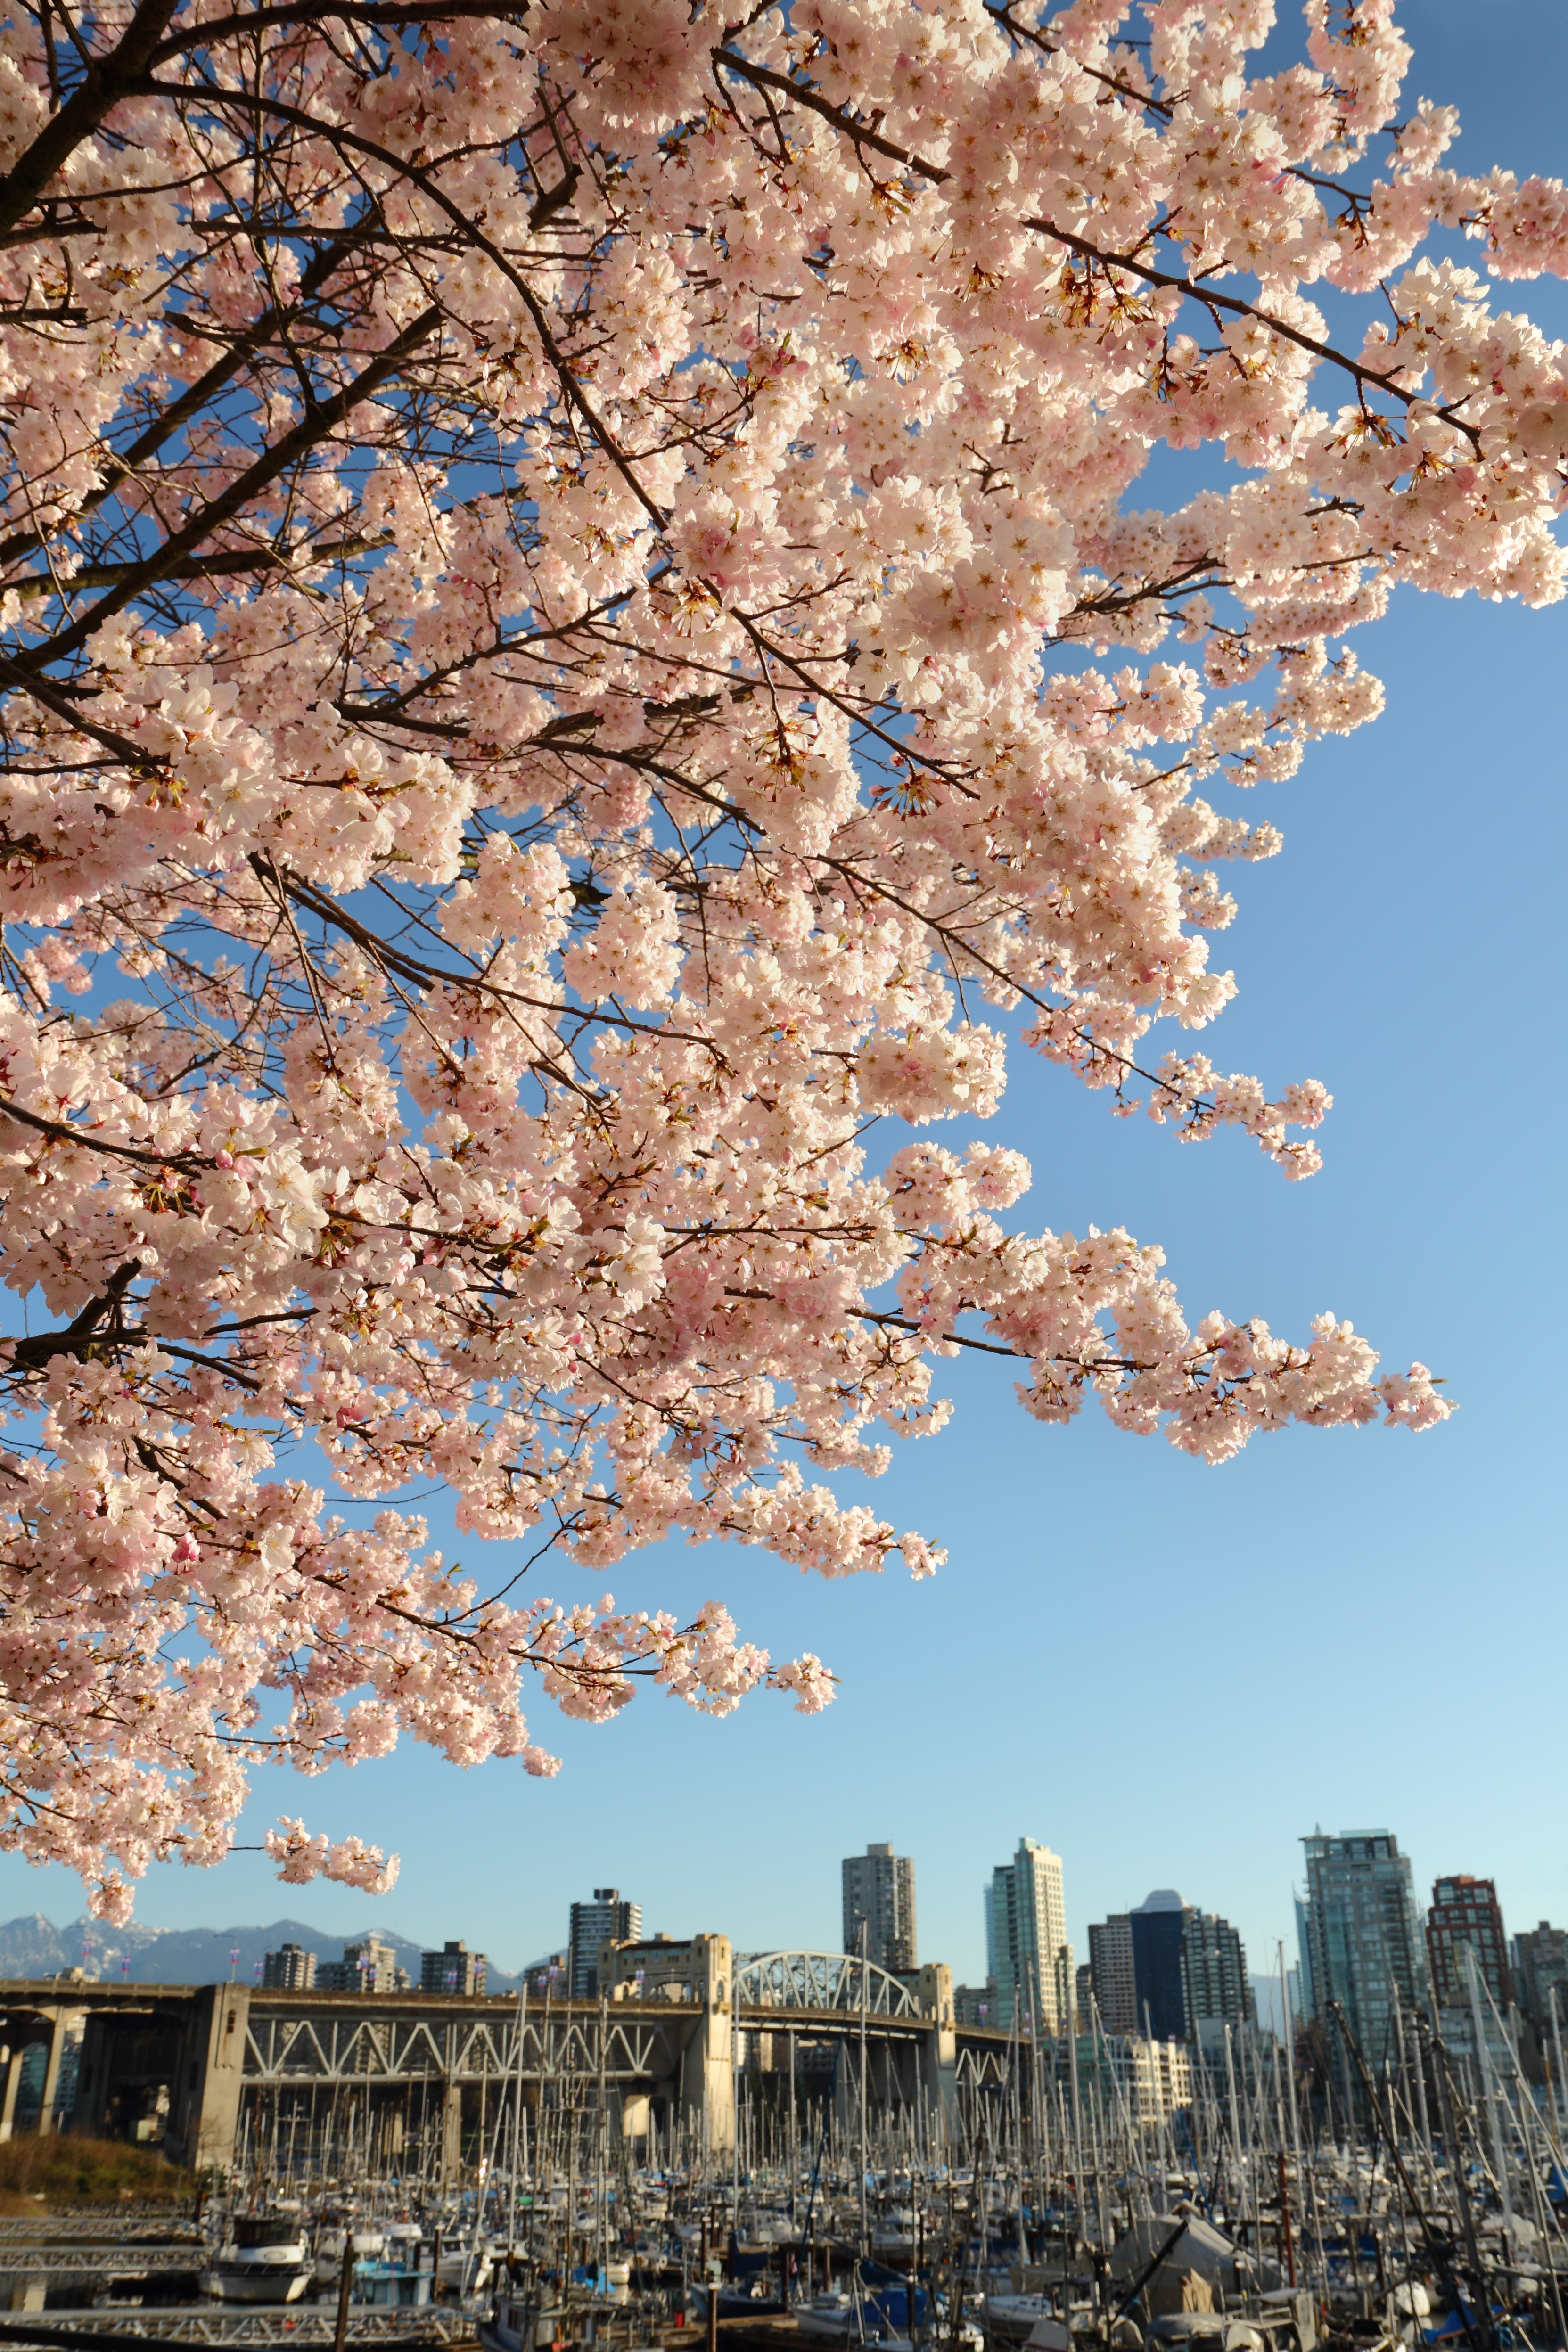 Vancouver Cherry Blossoms with Beautiful Skyline of Vancouver, BC downtown - Picture of the Day #20